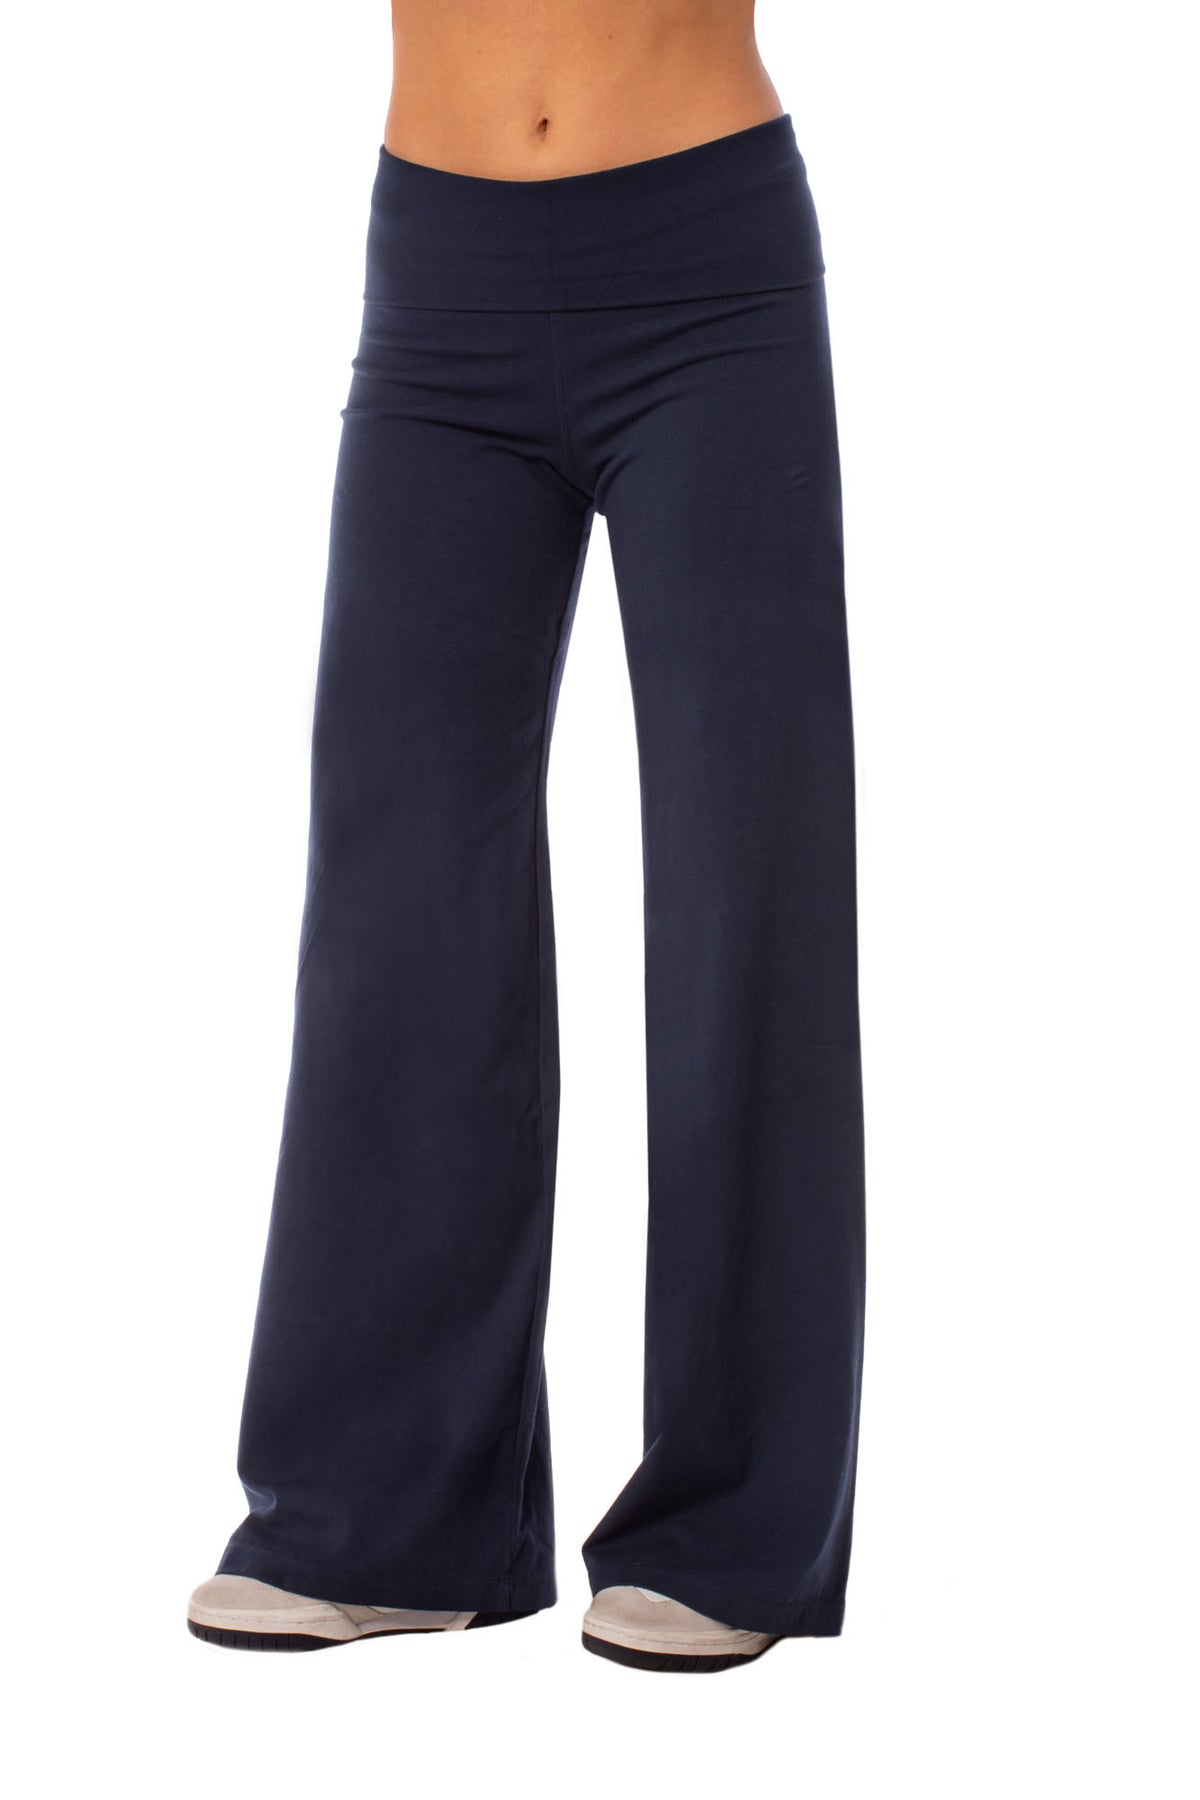 Hard Tail Contour Rolldown Bootleg Flare Pant at